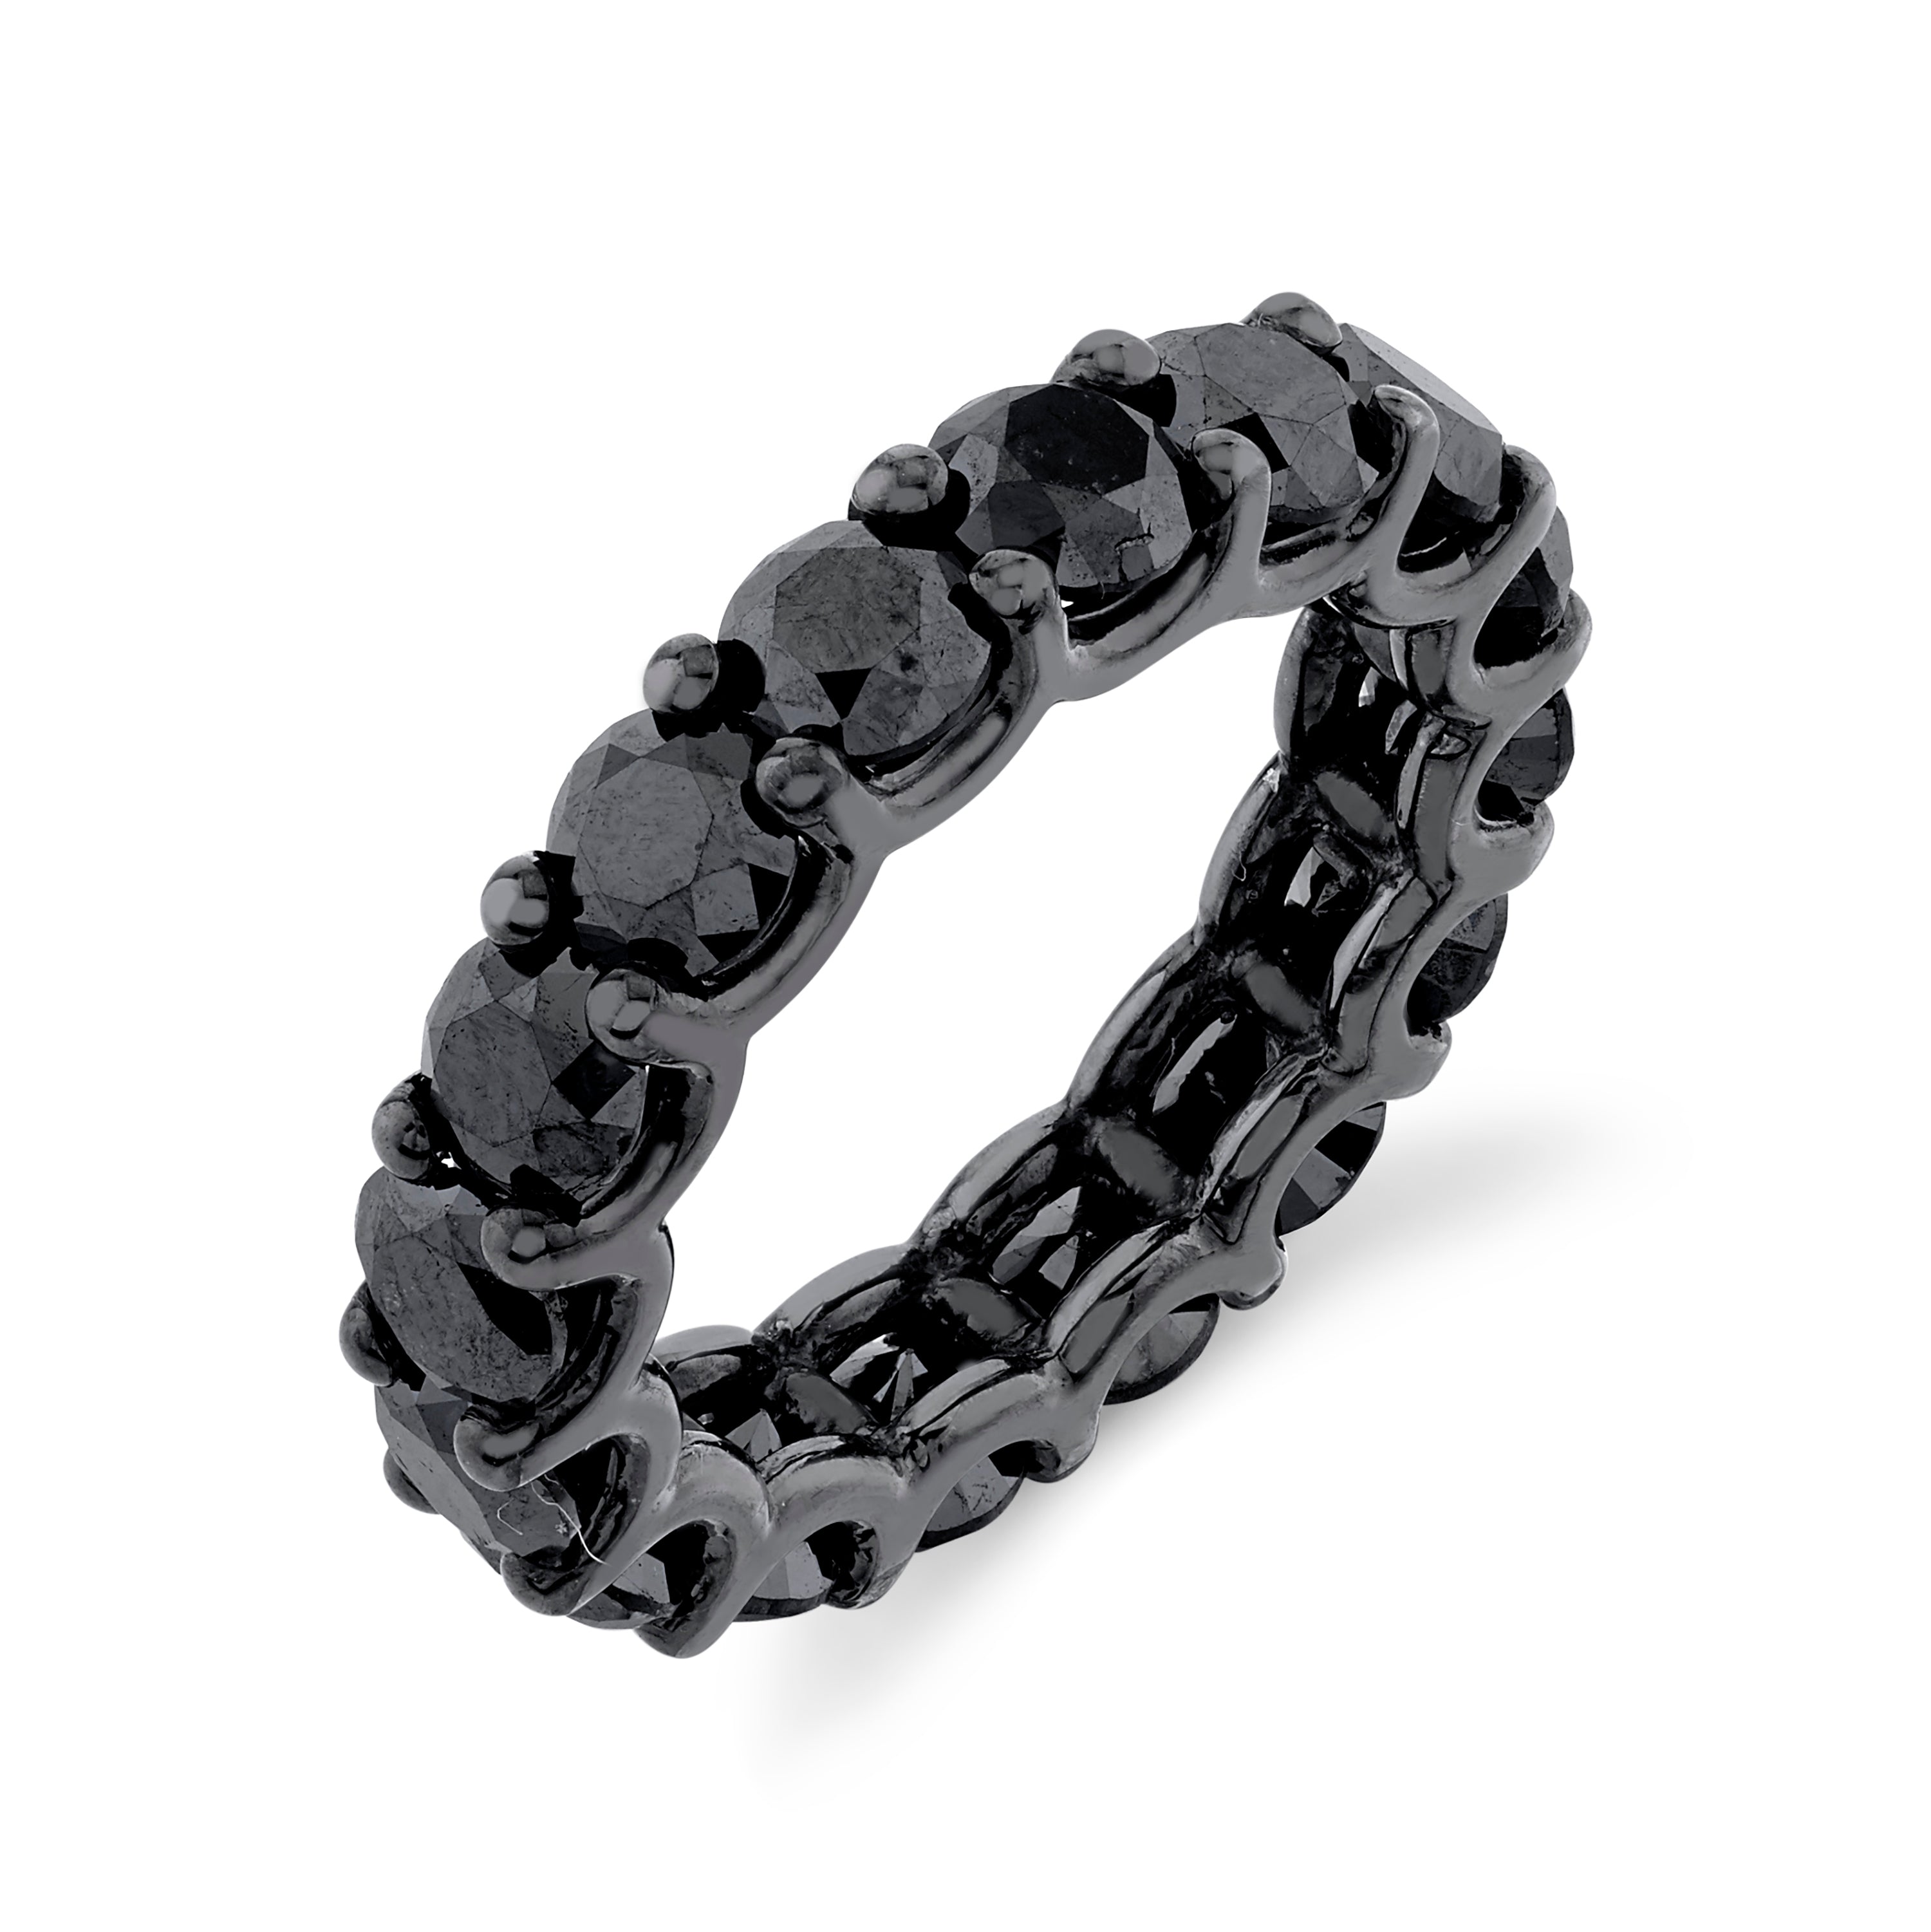 Iced Out Band Bracelet | Iced Out Bracelet For Men - 6 ICE